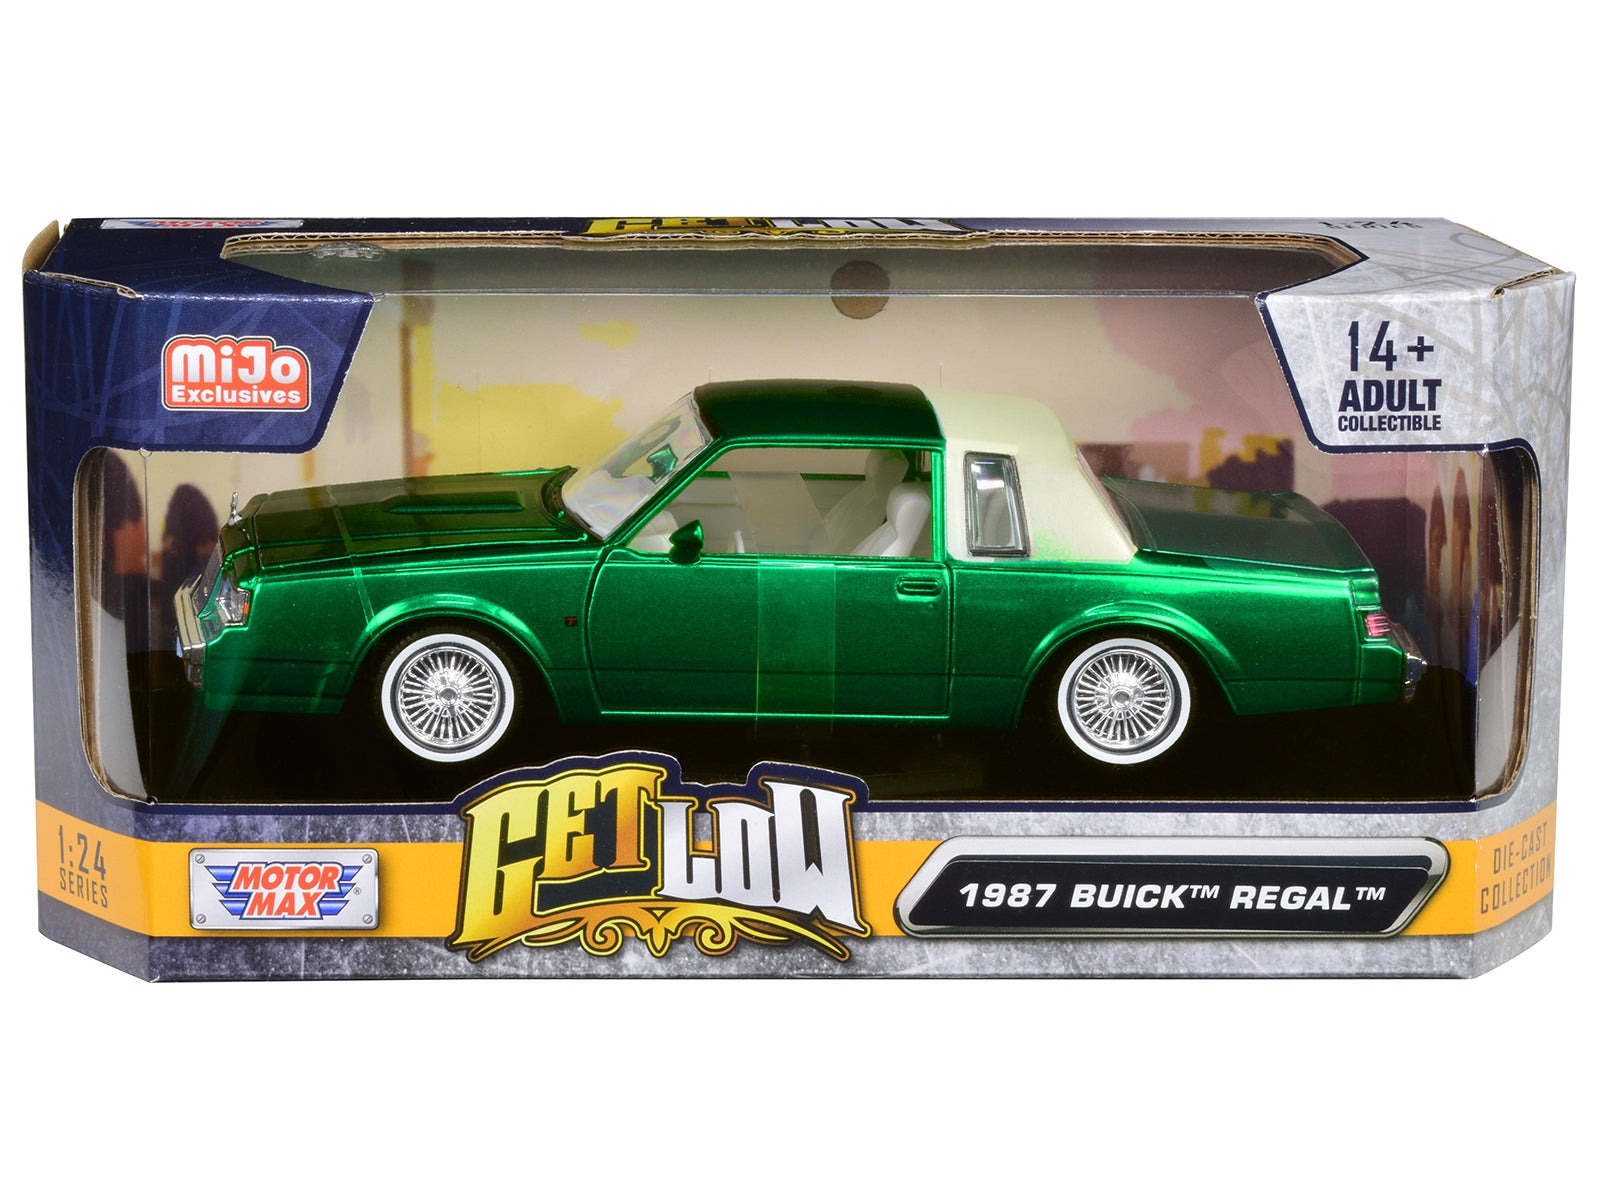 1987 Buick Regal Green Metallic with White Interior "Get Low" Series 1/24 Diecast Model Car by Motormax